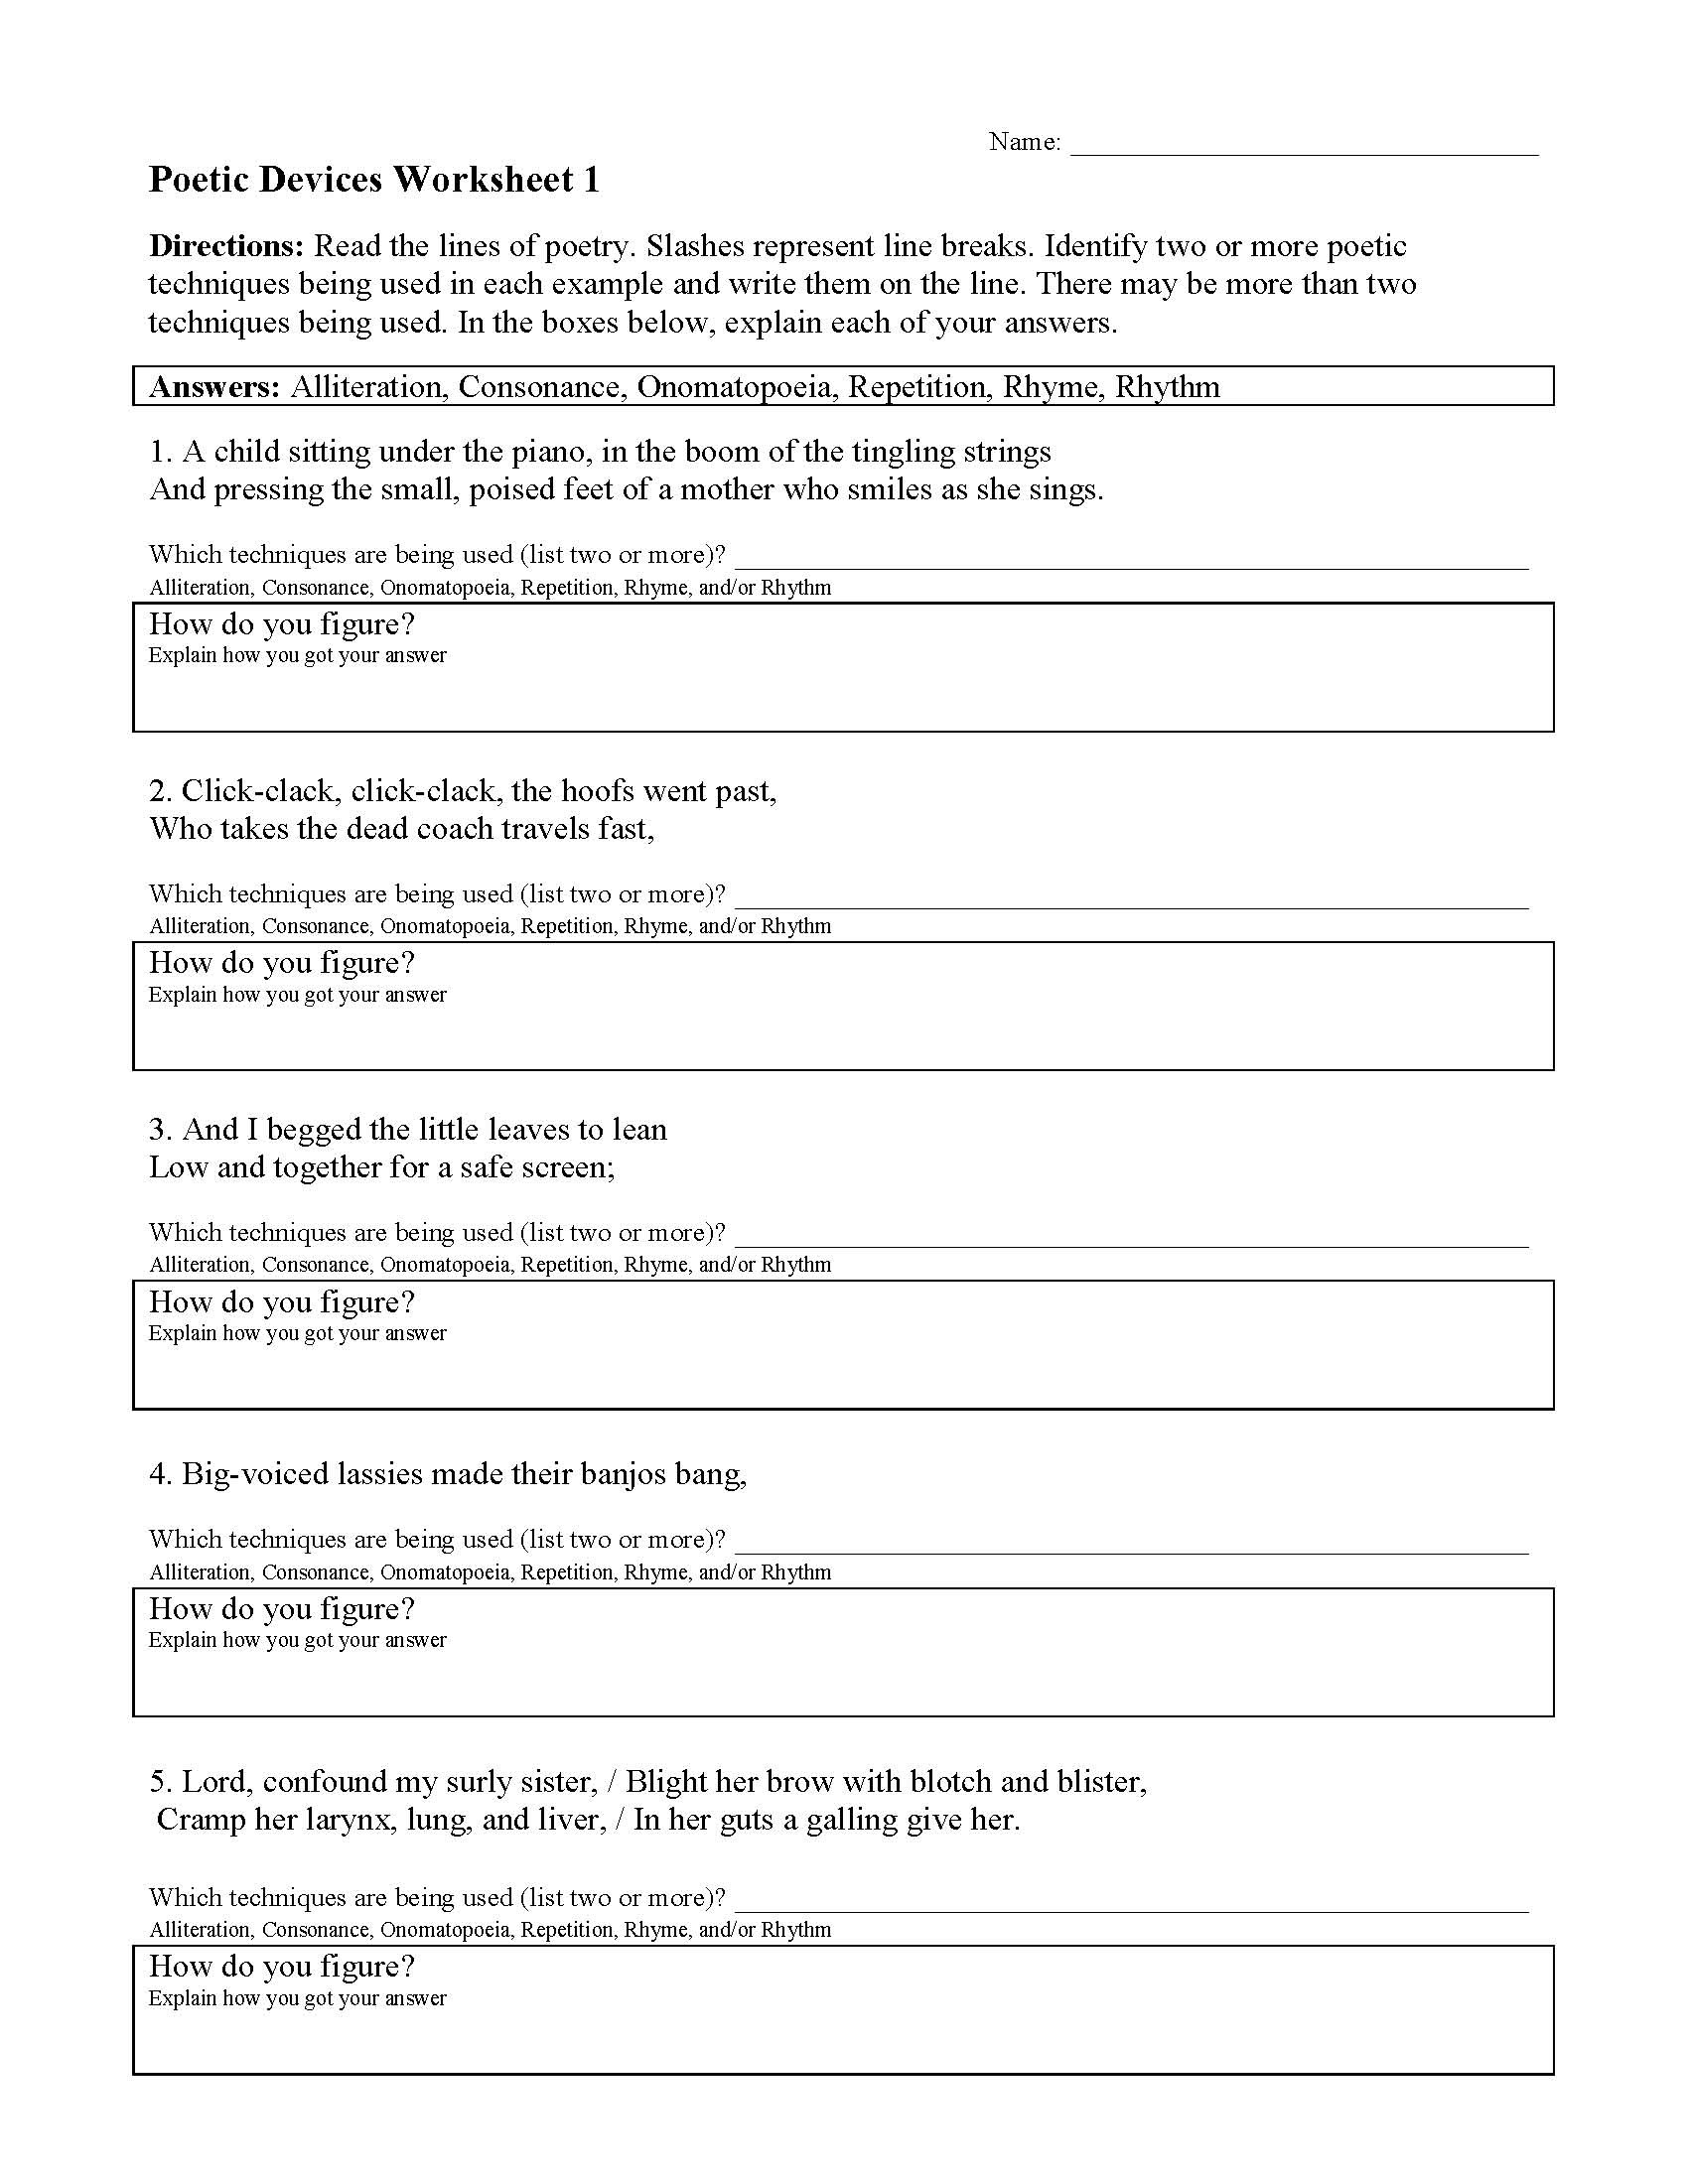 Poetic Devices Worksheet 1  Preview